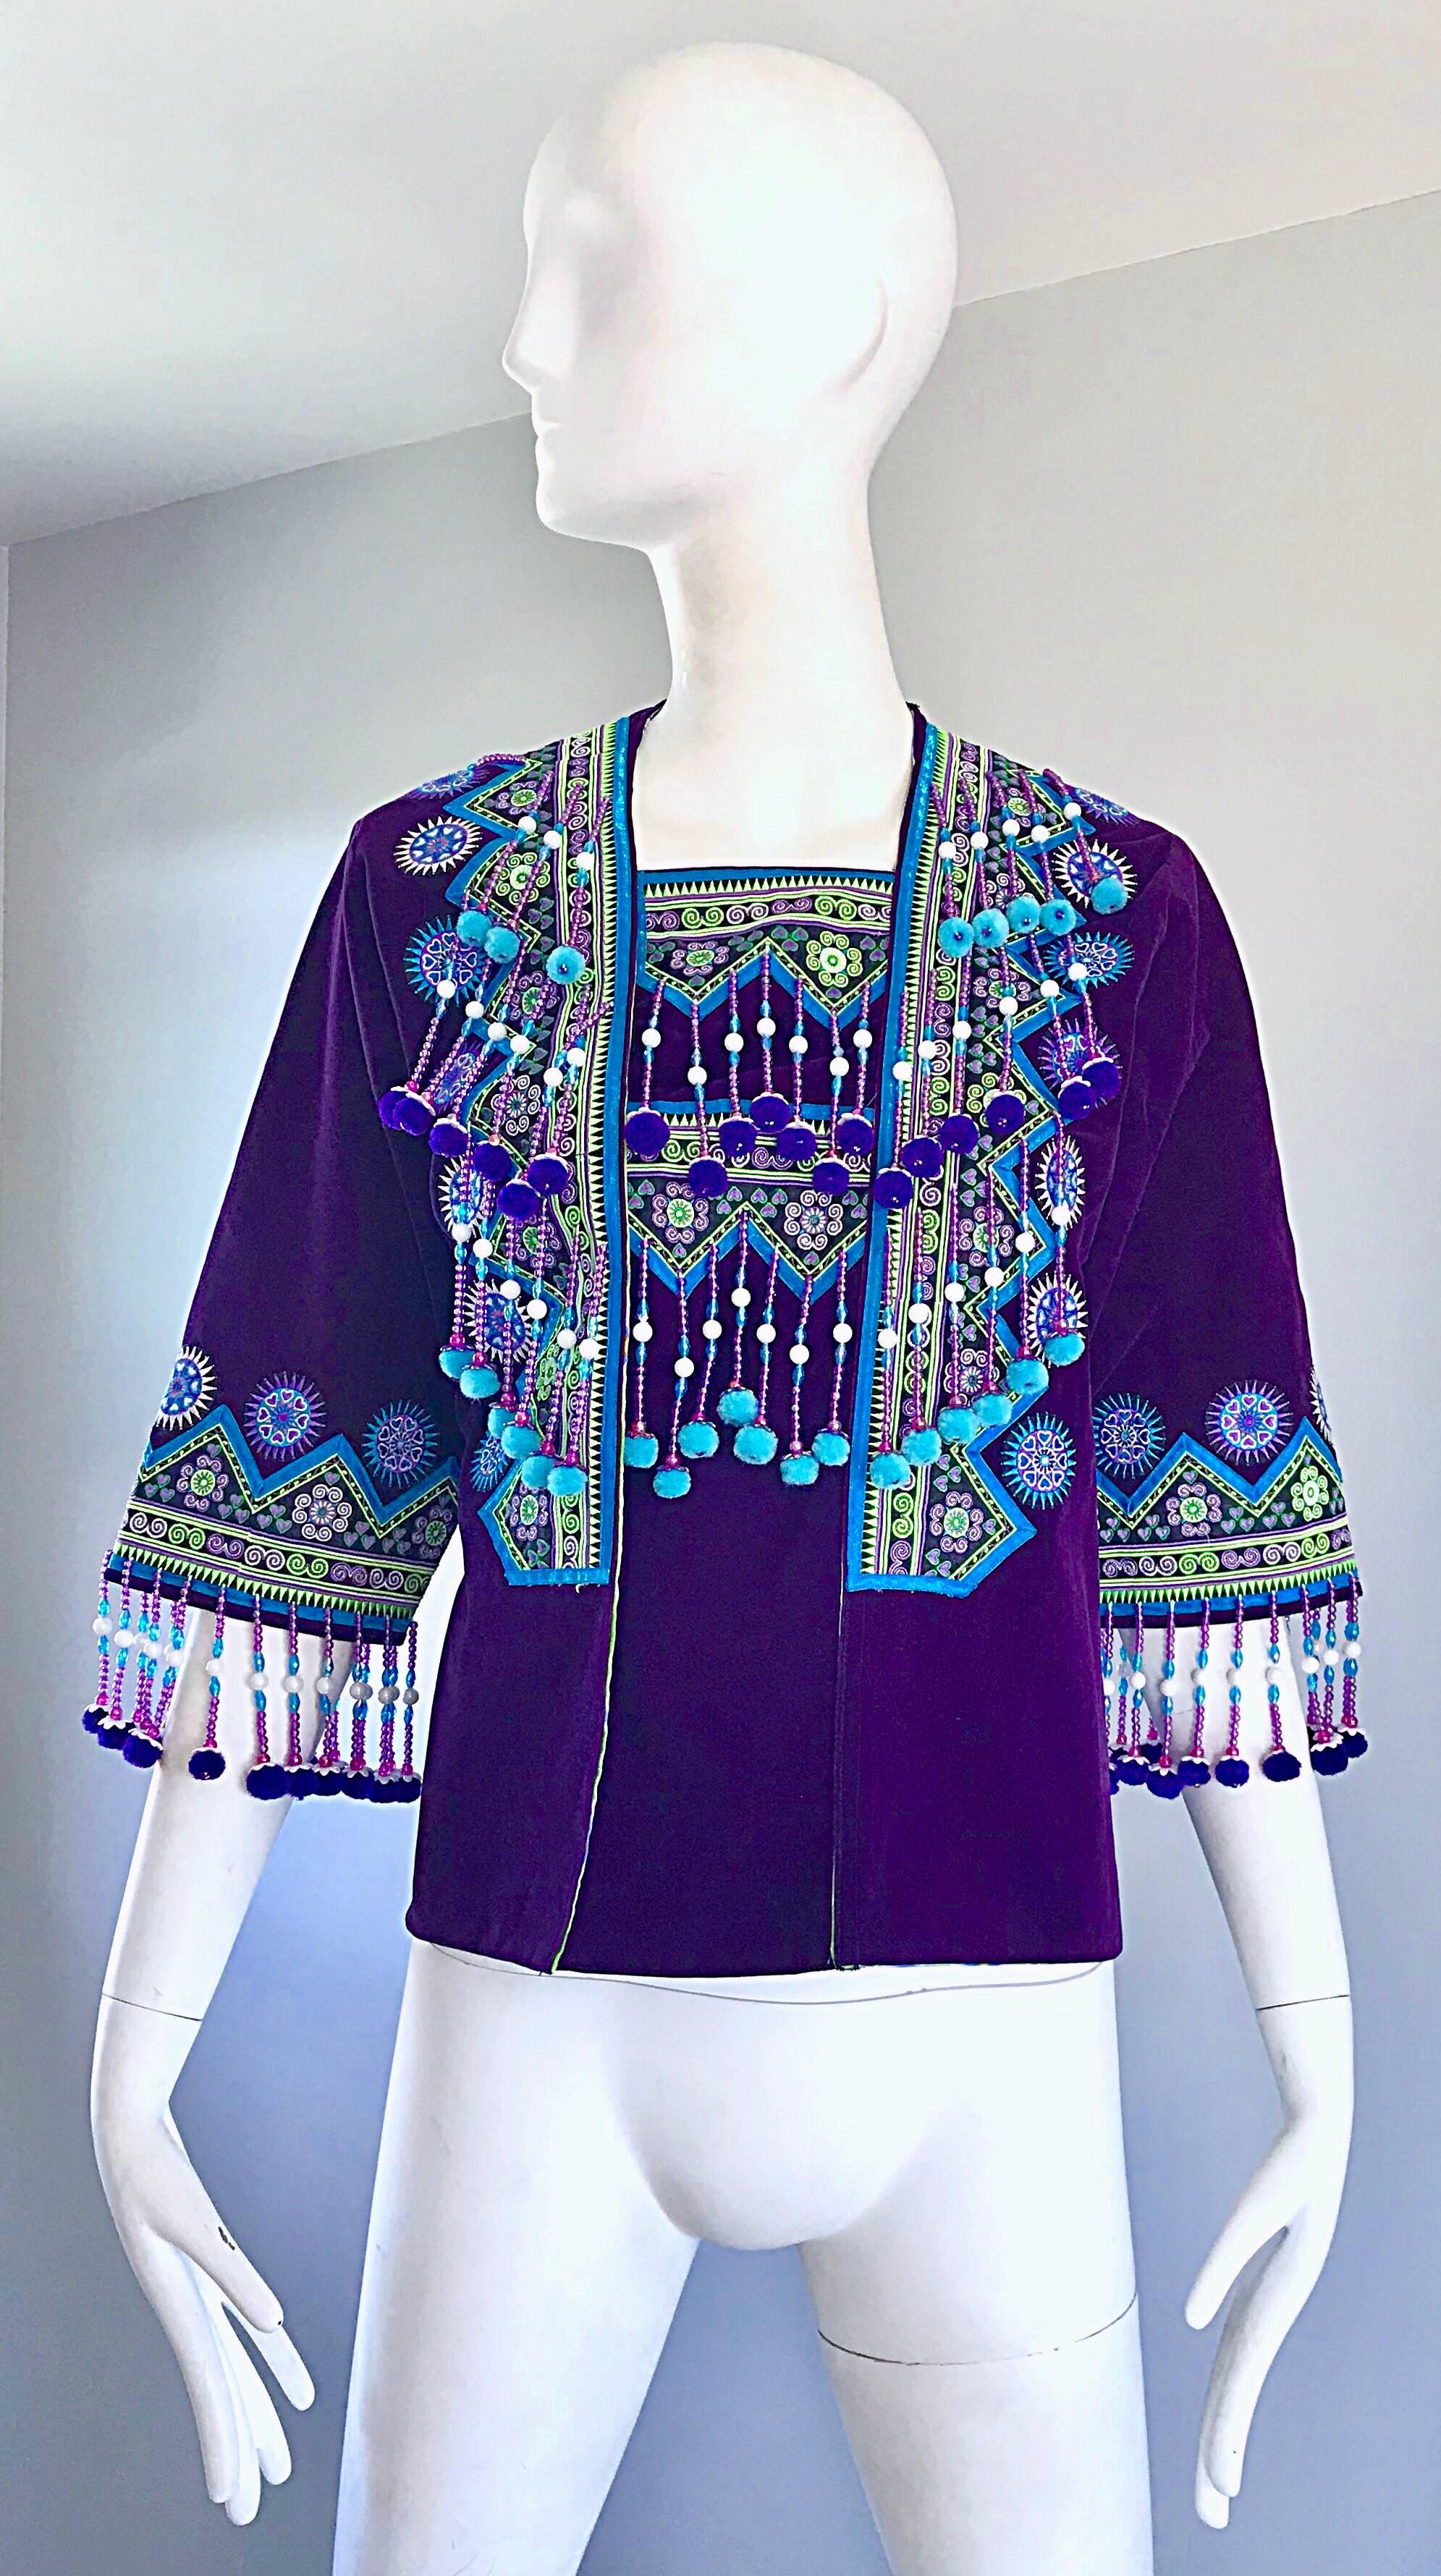 Amazing 1970s rich purple boho ethnic beaded Hmong inspired kimono style jacket! Features a luxurious regal purple on soft cotton velvet. Colorful embroidery throughout. Beaded fringe throughout the front bodice, at sleeves, and across the top back.